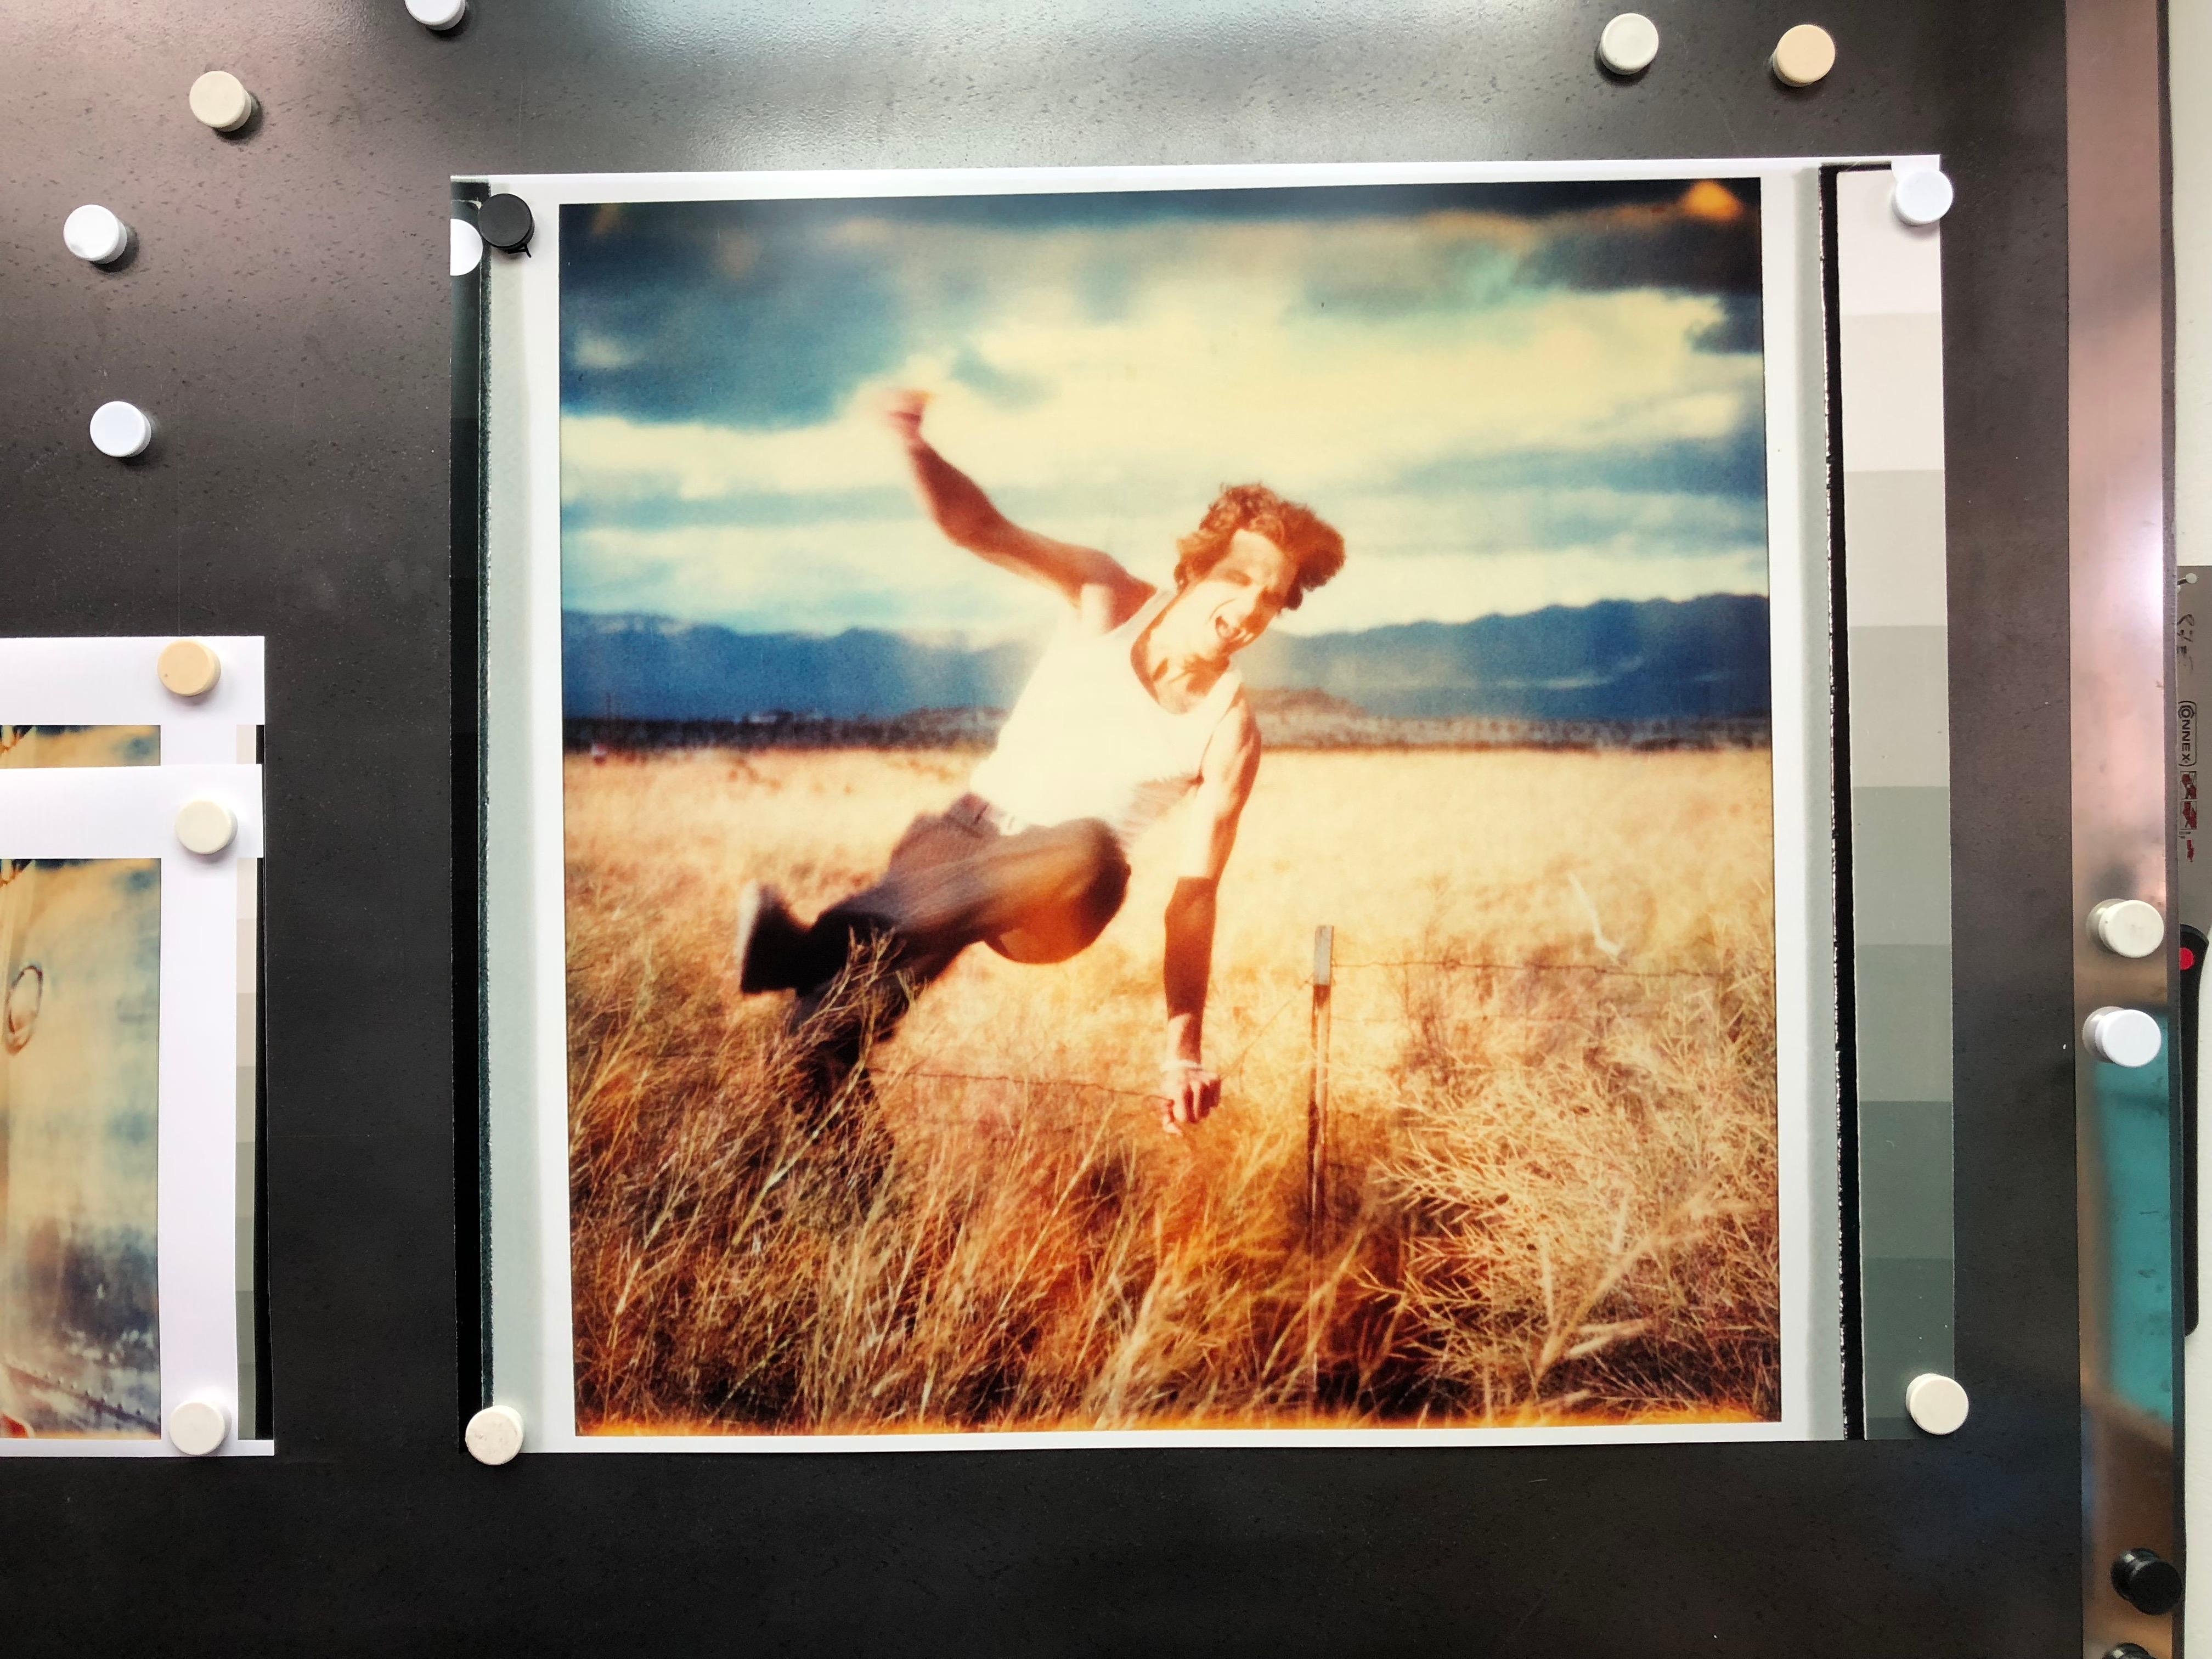 Field of Dreams (Sidewinder) - 2005
80 x 78 cm, 
Edition 2/5, 
analog C-Print, hand-printed by the artist, based on a Polaroid, 
Artist Inventory 3131.02, 
not mounted

Stefanie Schneider's scintillating situations take place in the American West.